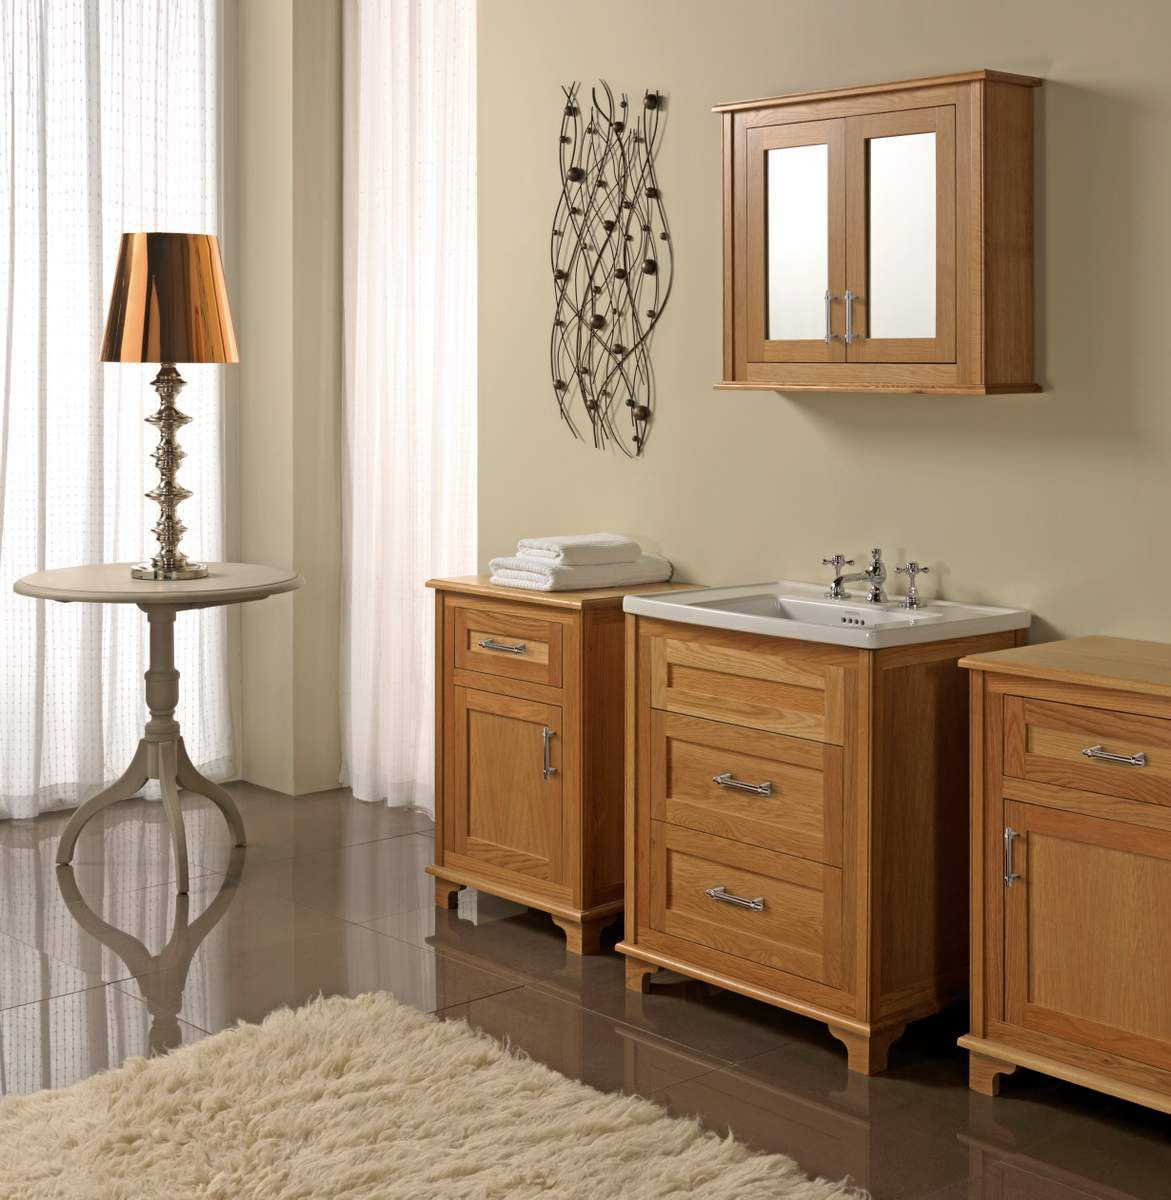 Bathroom Furniture Vanity Cabinets Cabinet Ideas throughout dimensions 1171 X 1200